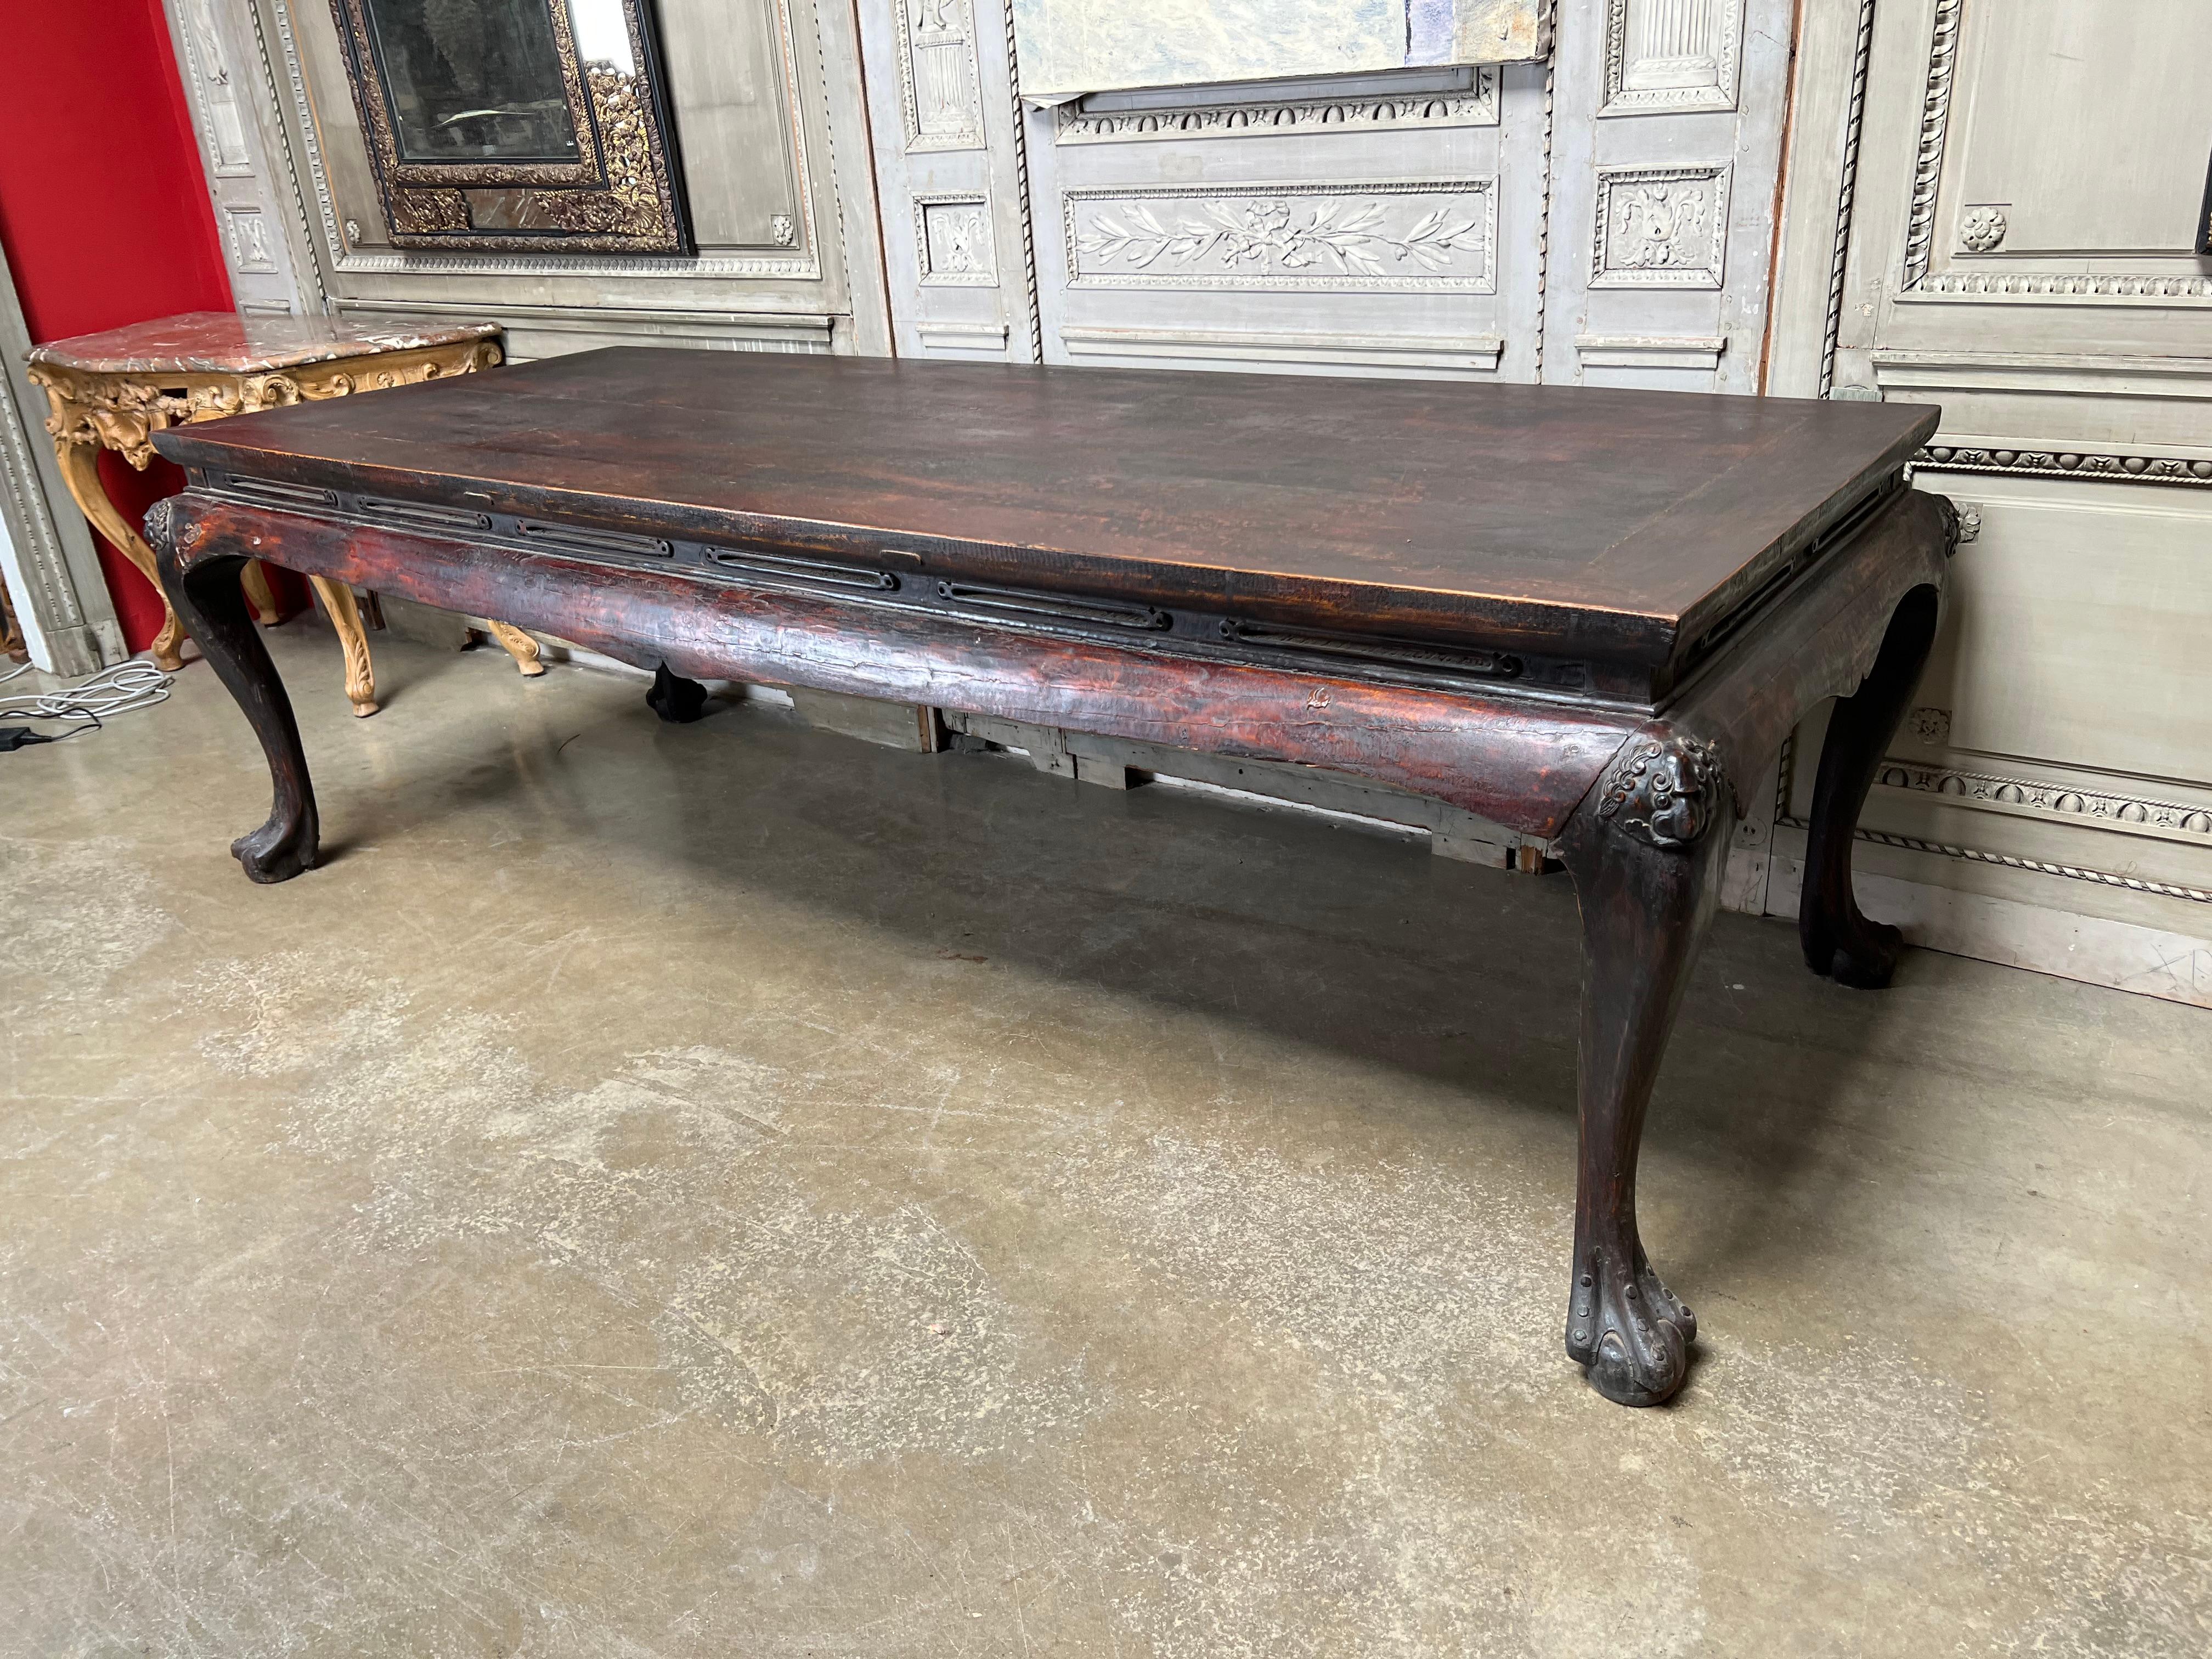 A very large carved and lacquered 19th century elm table from China. This highly decorative table has an old crusty lacquered patina that is beautiful and can be used as a large center table, dining table, kitchen table, work table or conference